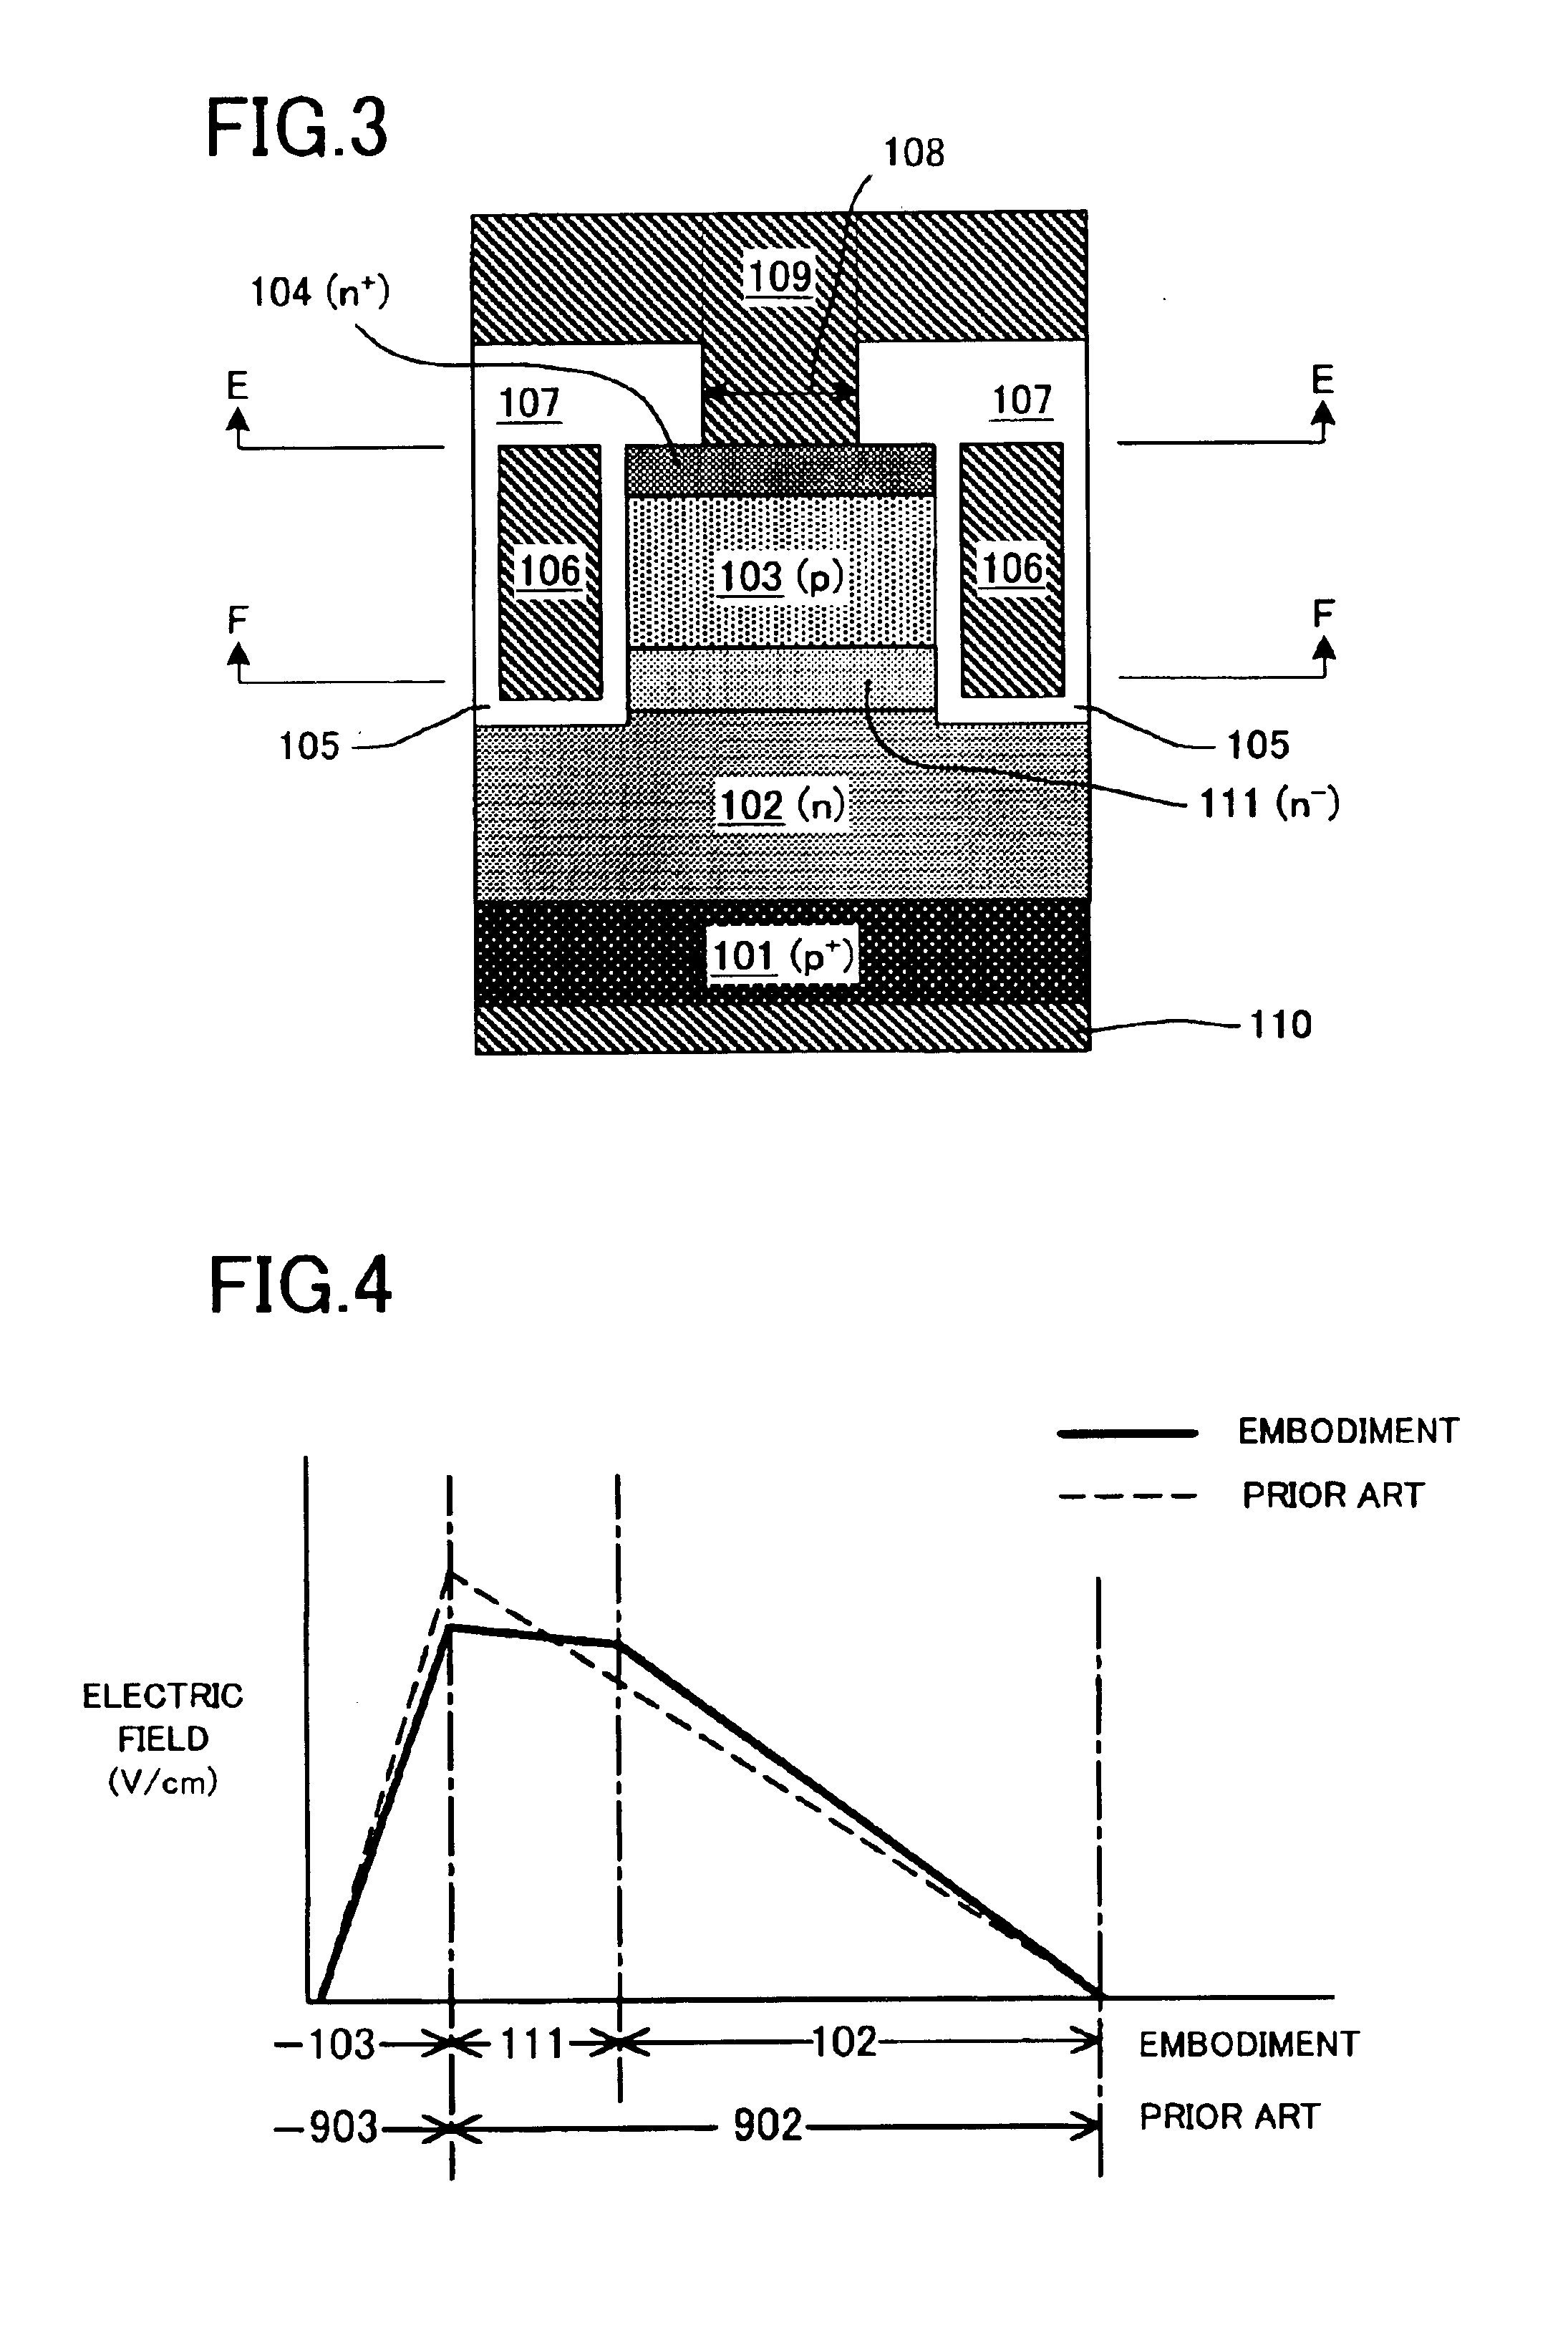 High withstand voltage field effect semiconductor device with a field dispersion region